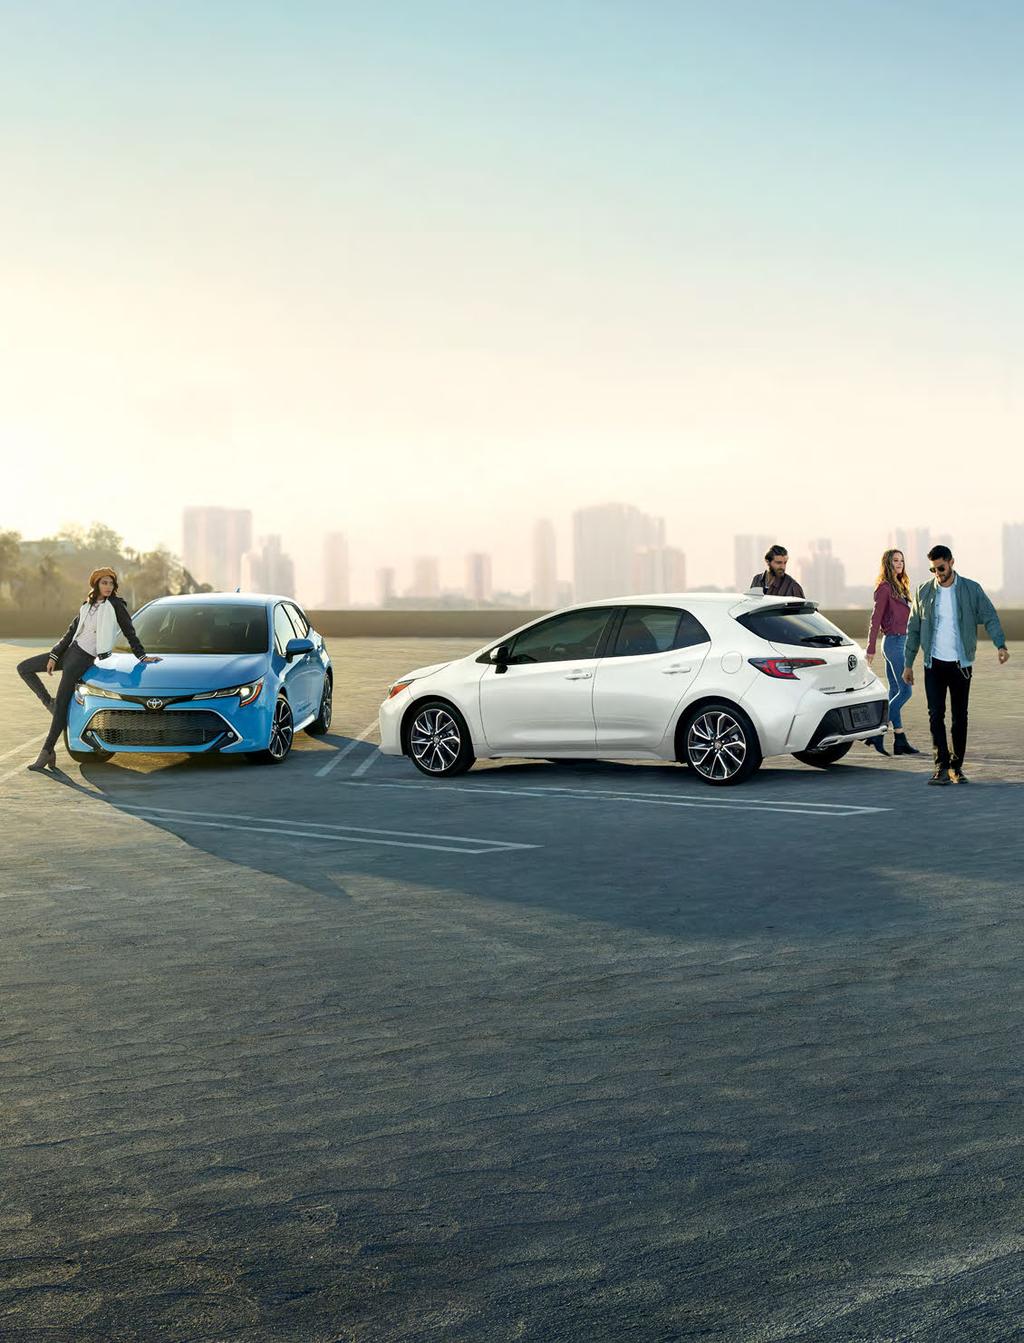 DESIGNED FOR REAL LIFE THE ALL-NEW. The 2019 Corolla Hatchback keeps the fun going. Low to the ground and lightweight, this energetic hatch will reintroduce you to the thrill of driving.